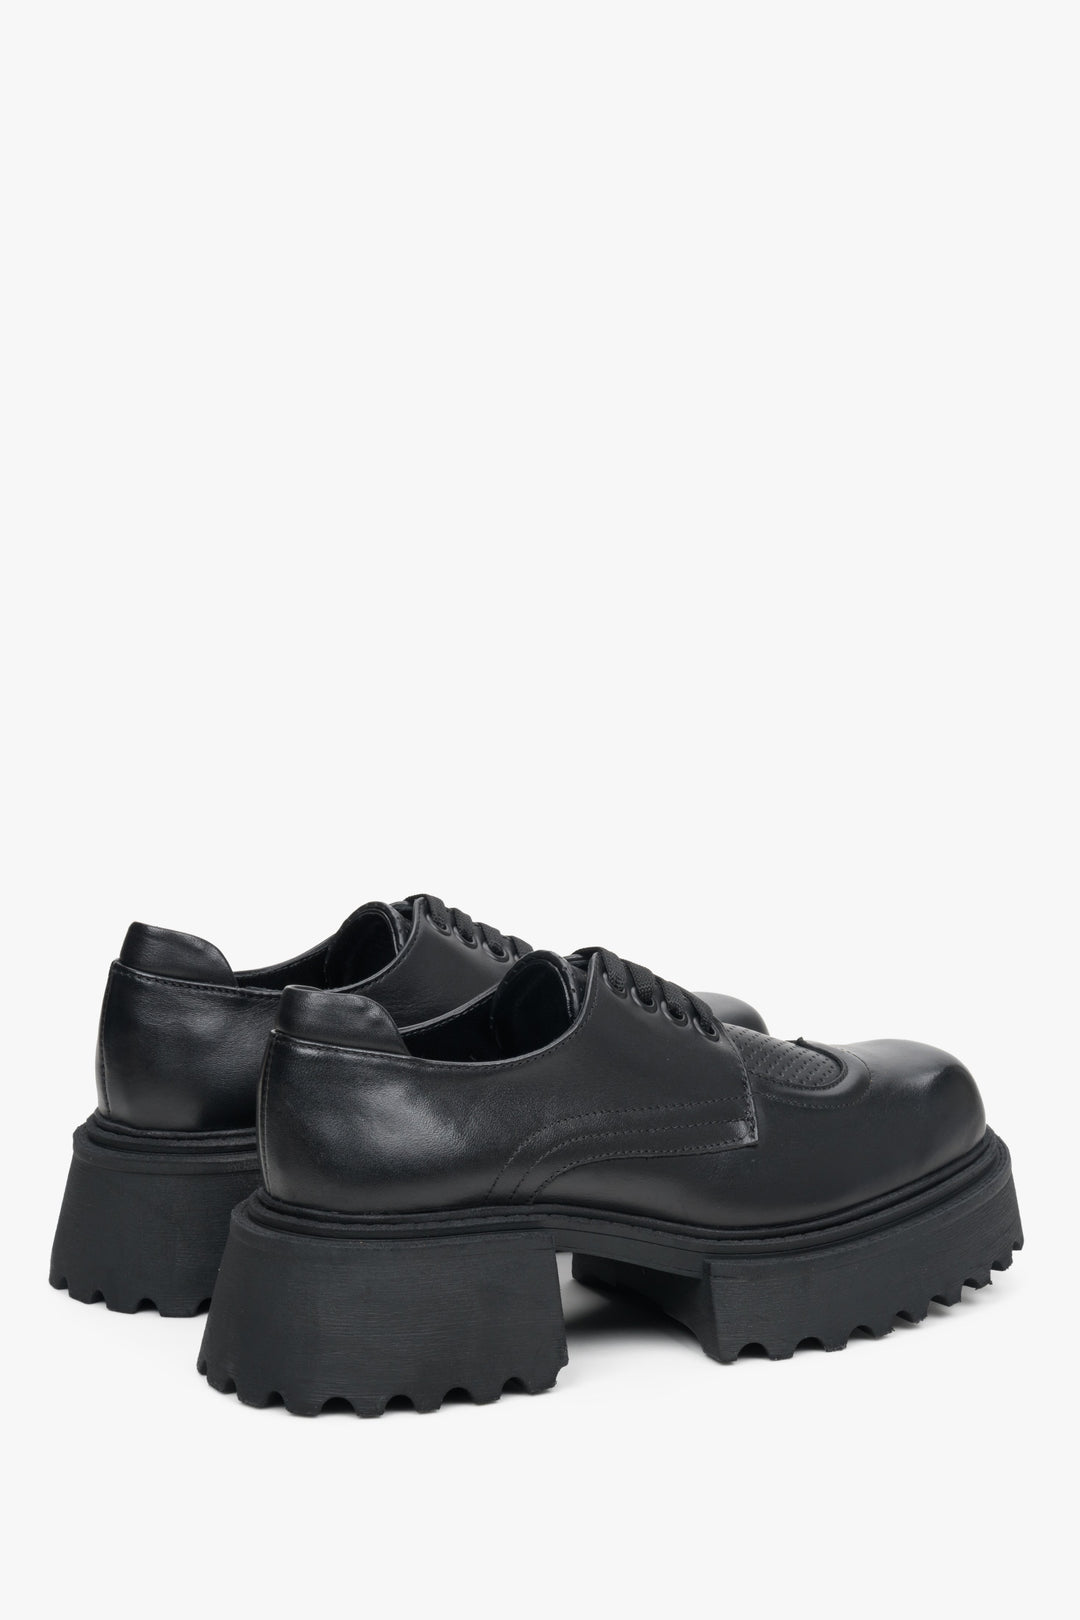  Women's lace-up shoes in black made of genuine leather by Estro - close-up on the side line and heel.